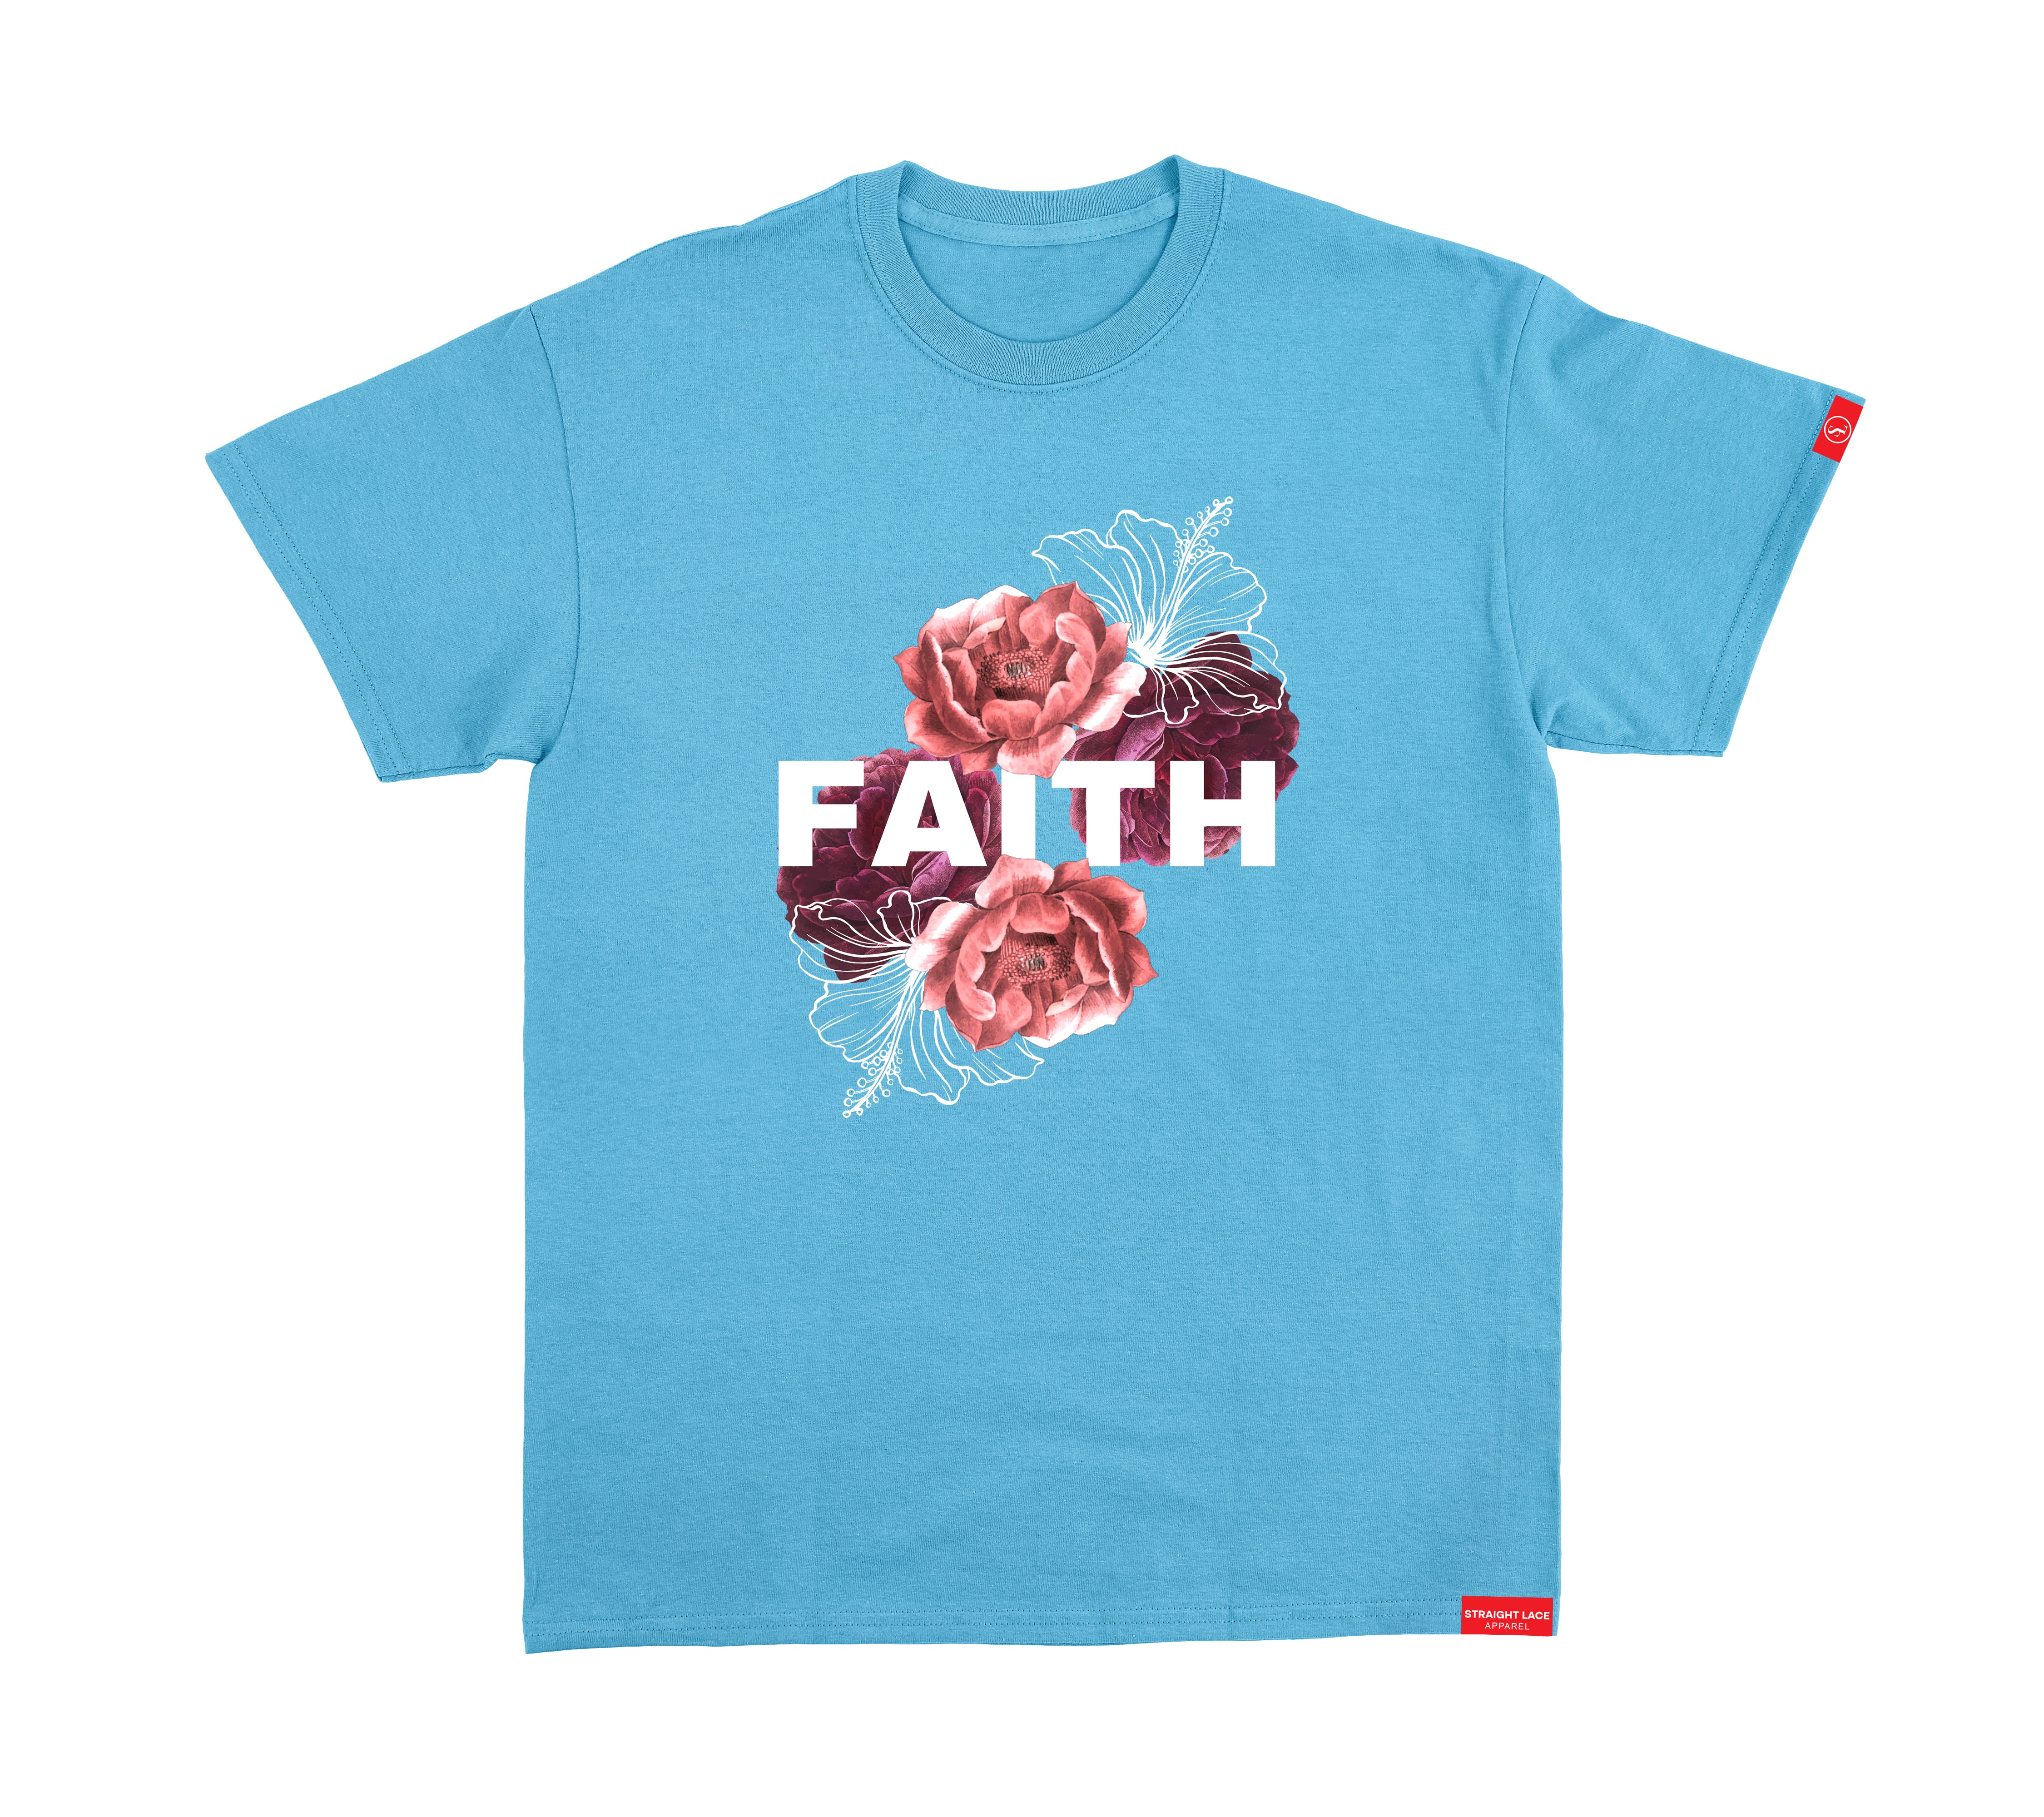 FAITH STRAIGHT LACE T SHIRT (Classic Fit)